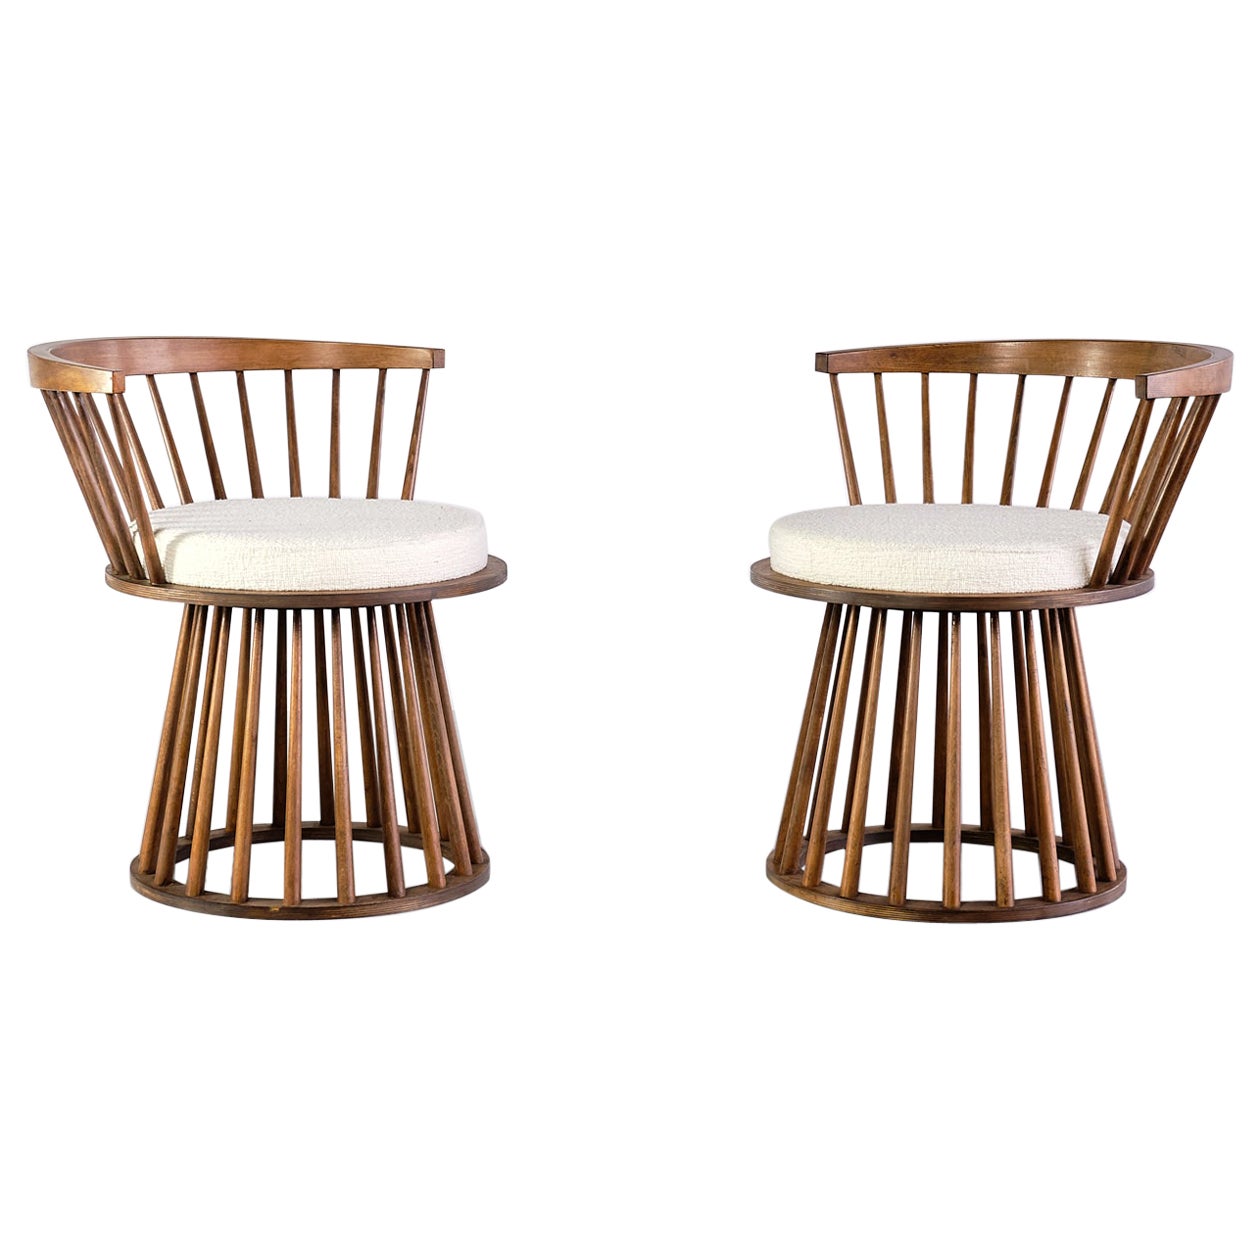 Pair of French Modern Spindle Chairs in Oak and White Bouclé Fabric, 1950s